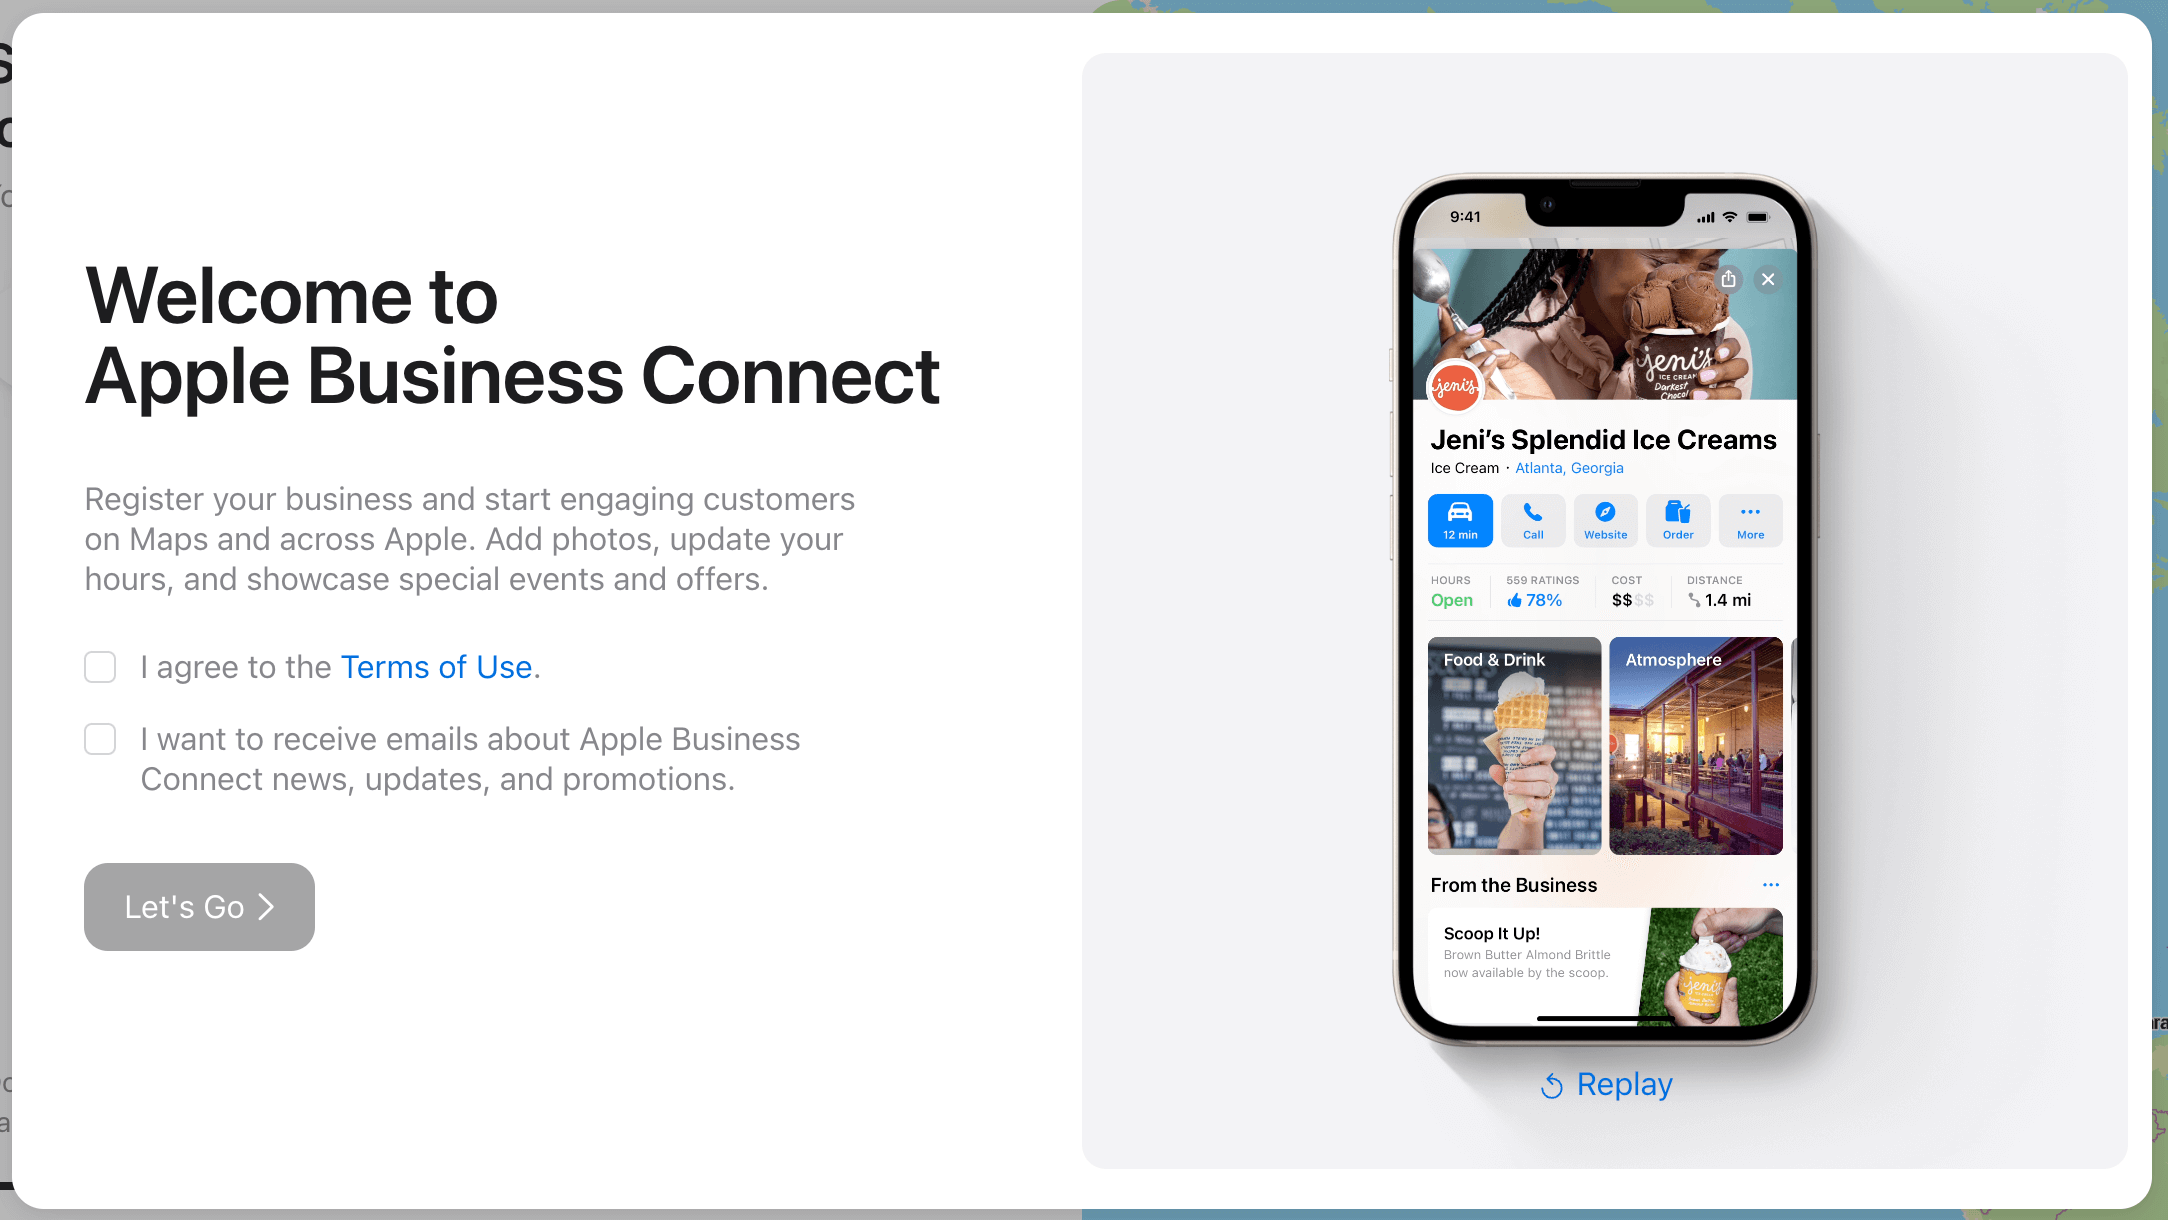 Apple Business Connect welcome page where you can register your business and start engaging customers on maps and across Apple.